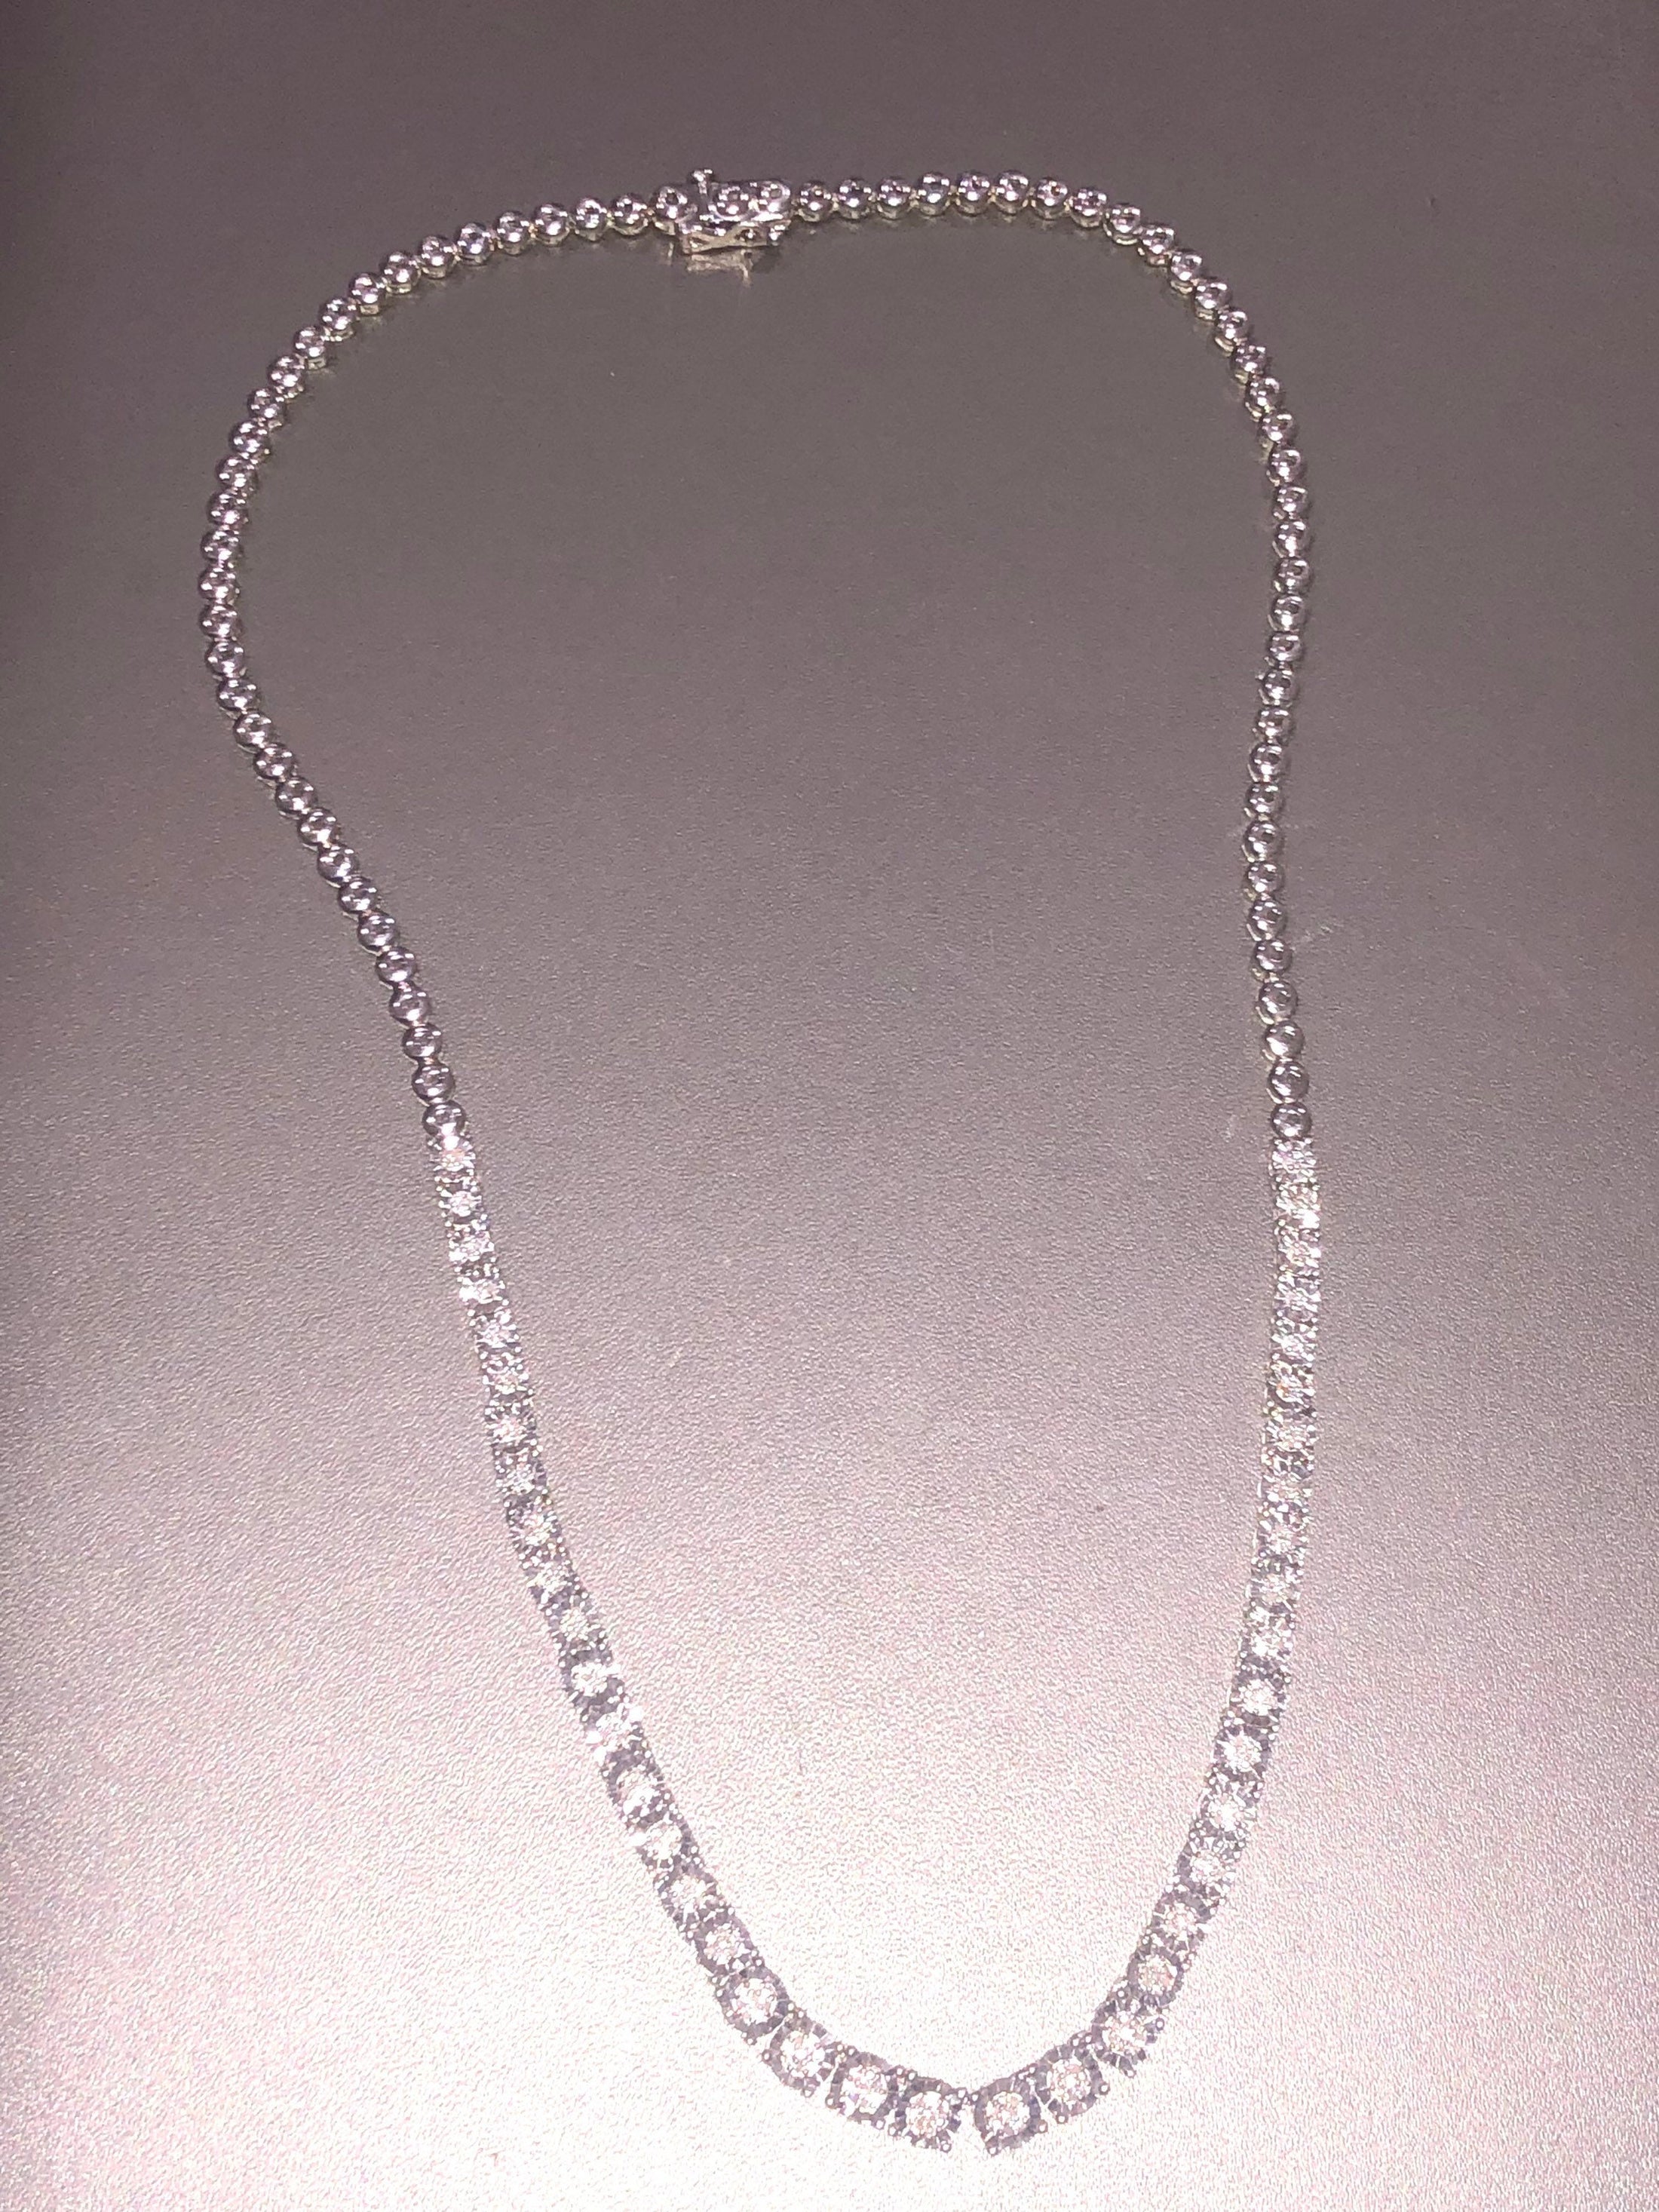 Real Diamond Tennis Chain Attract all eyes with this jaw-dropping diamond tennis necklace white gold vermeil best gift holiday